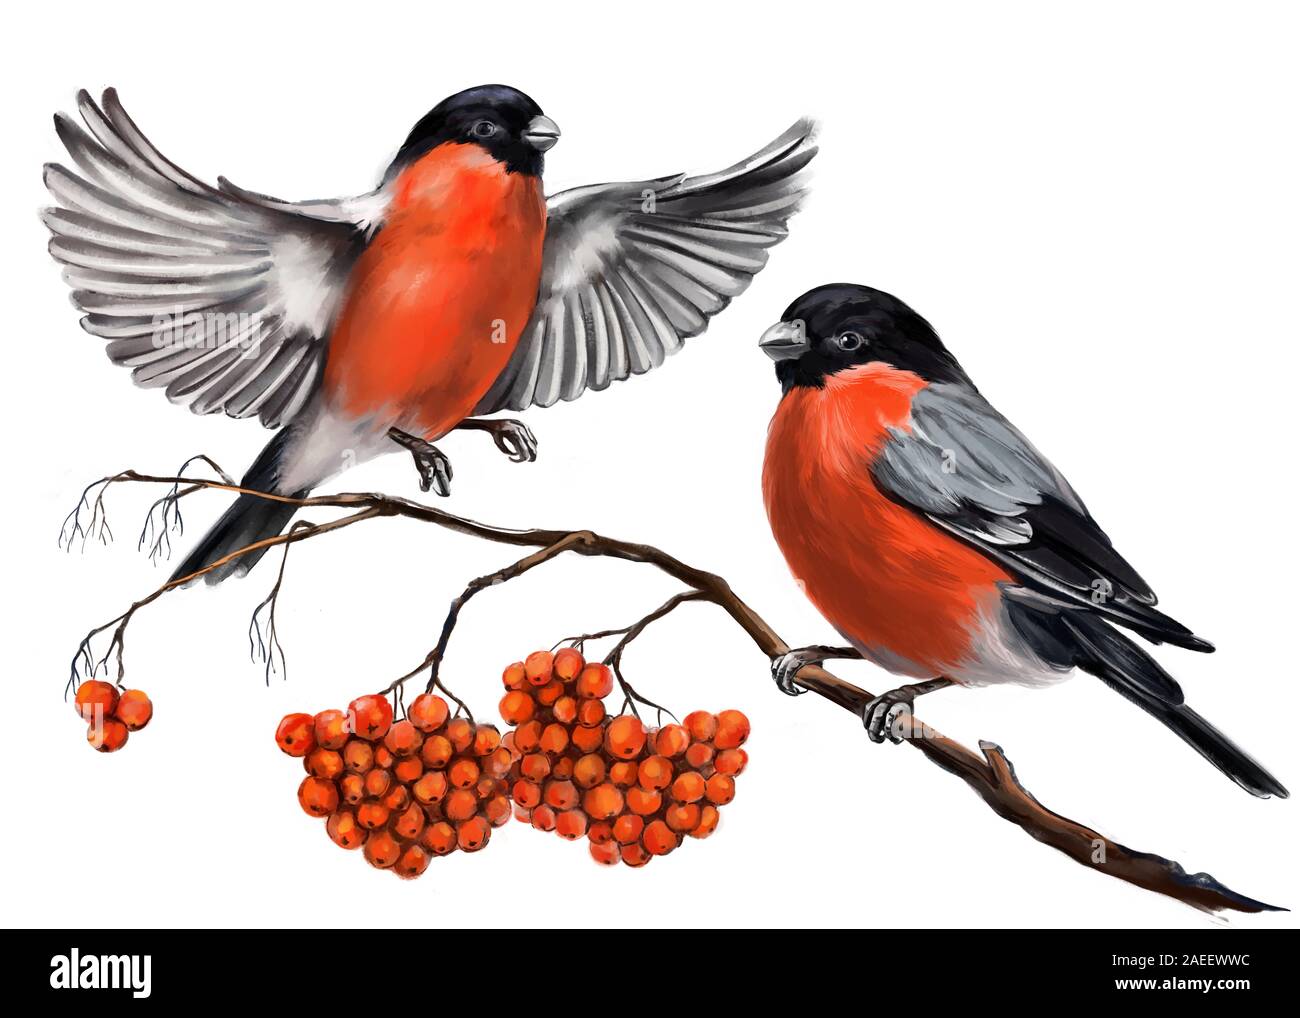 birds bullfinches on a branch of ashberry, art illustration painted with watercolors isolated on white background. Stock Photo